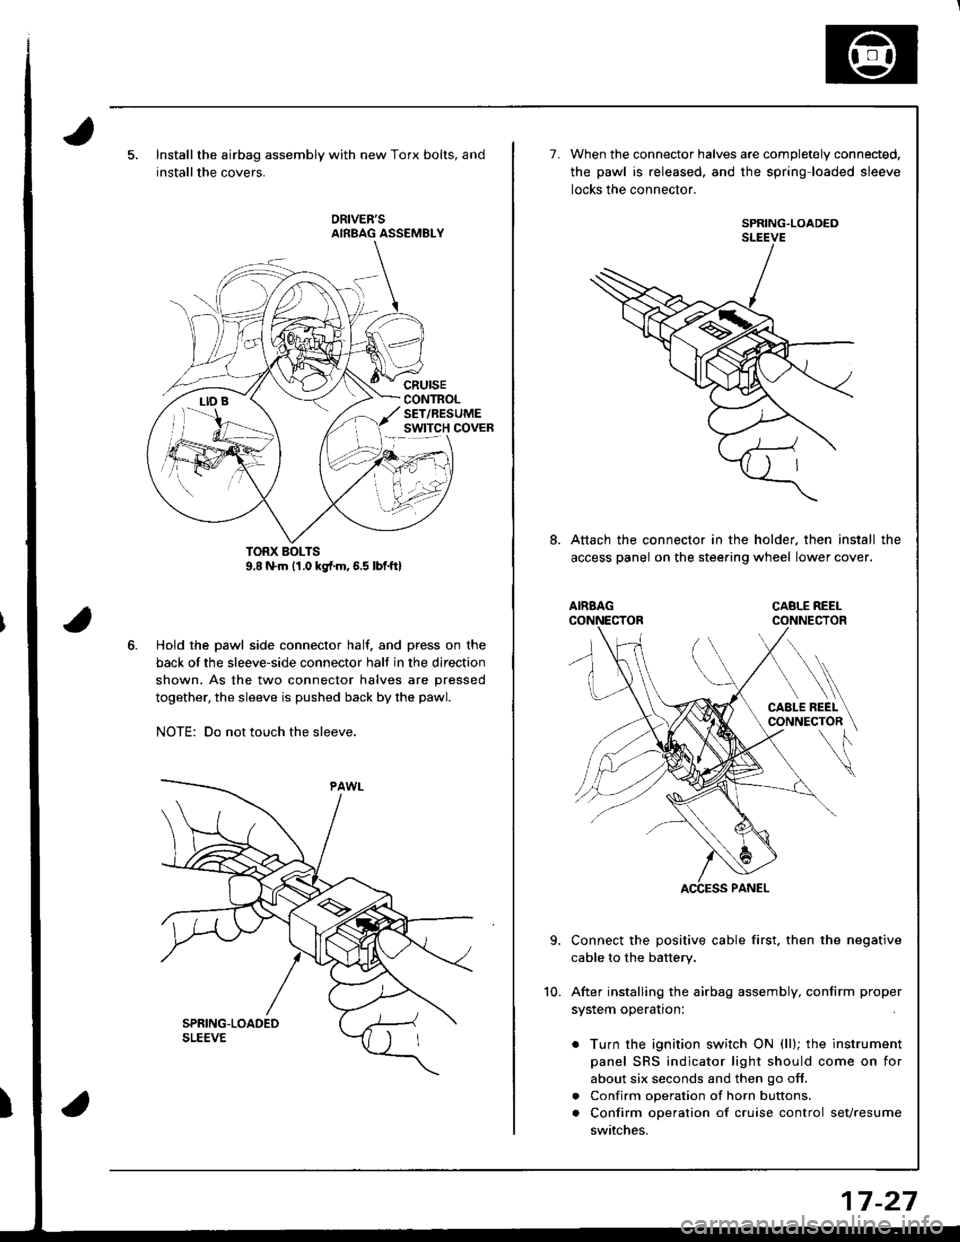 HONDA INTEGRA 1998 4.G Service Manual Installthe airbag assembly with new Torx bolts, and
installthe covers.
cRursECONTROLSET/RESUMEswtTcH covER
Hold the pawl side connector half. and press on the
back of the sleeve-side connector halt in